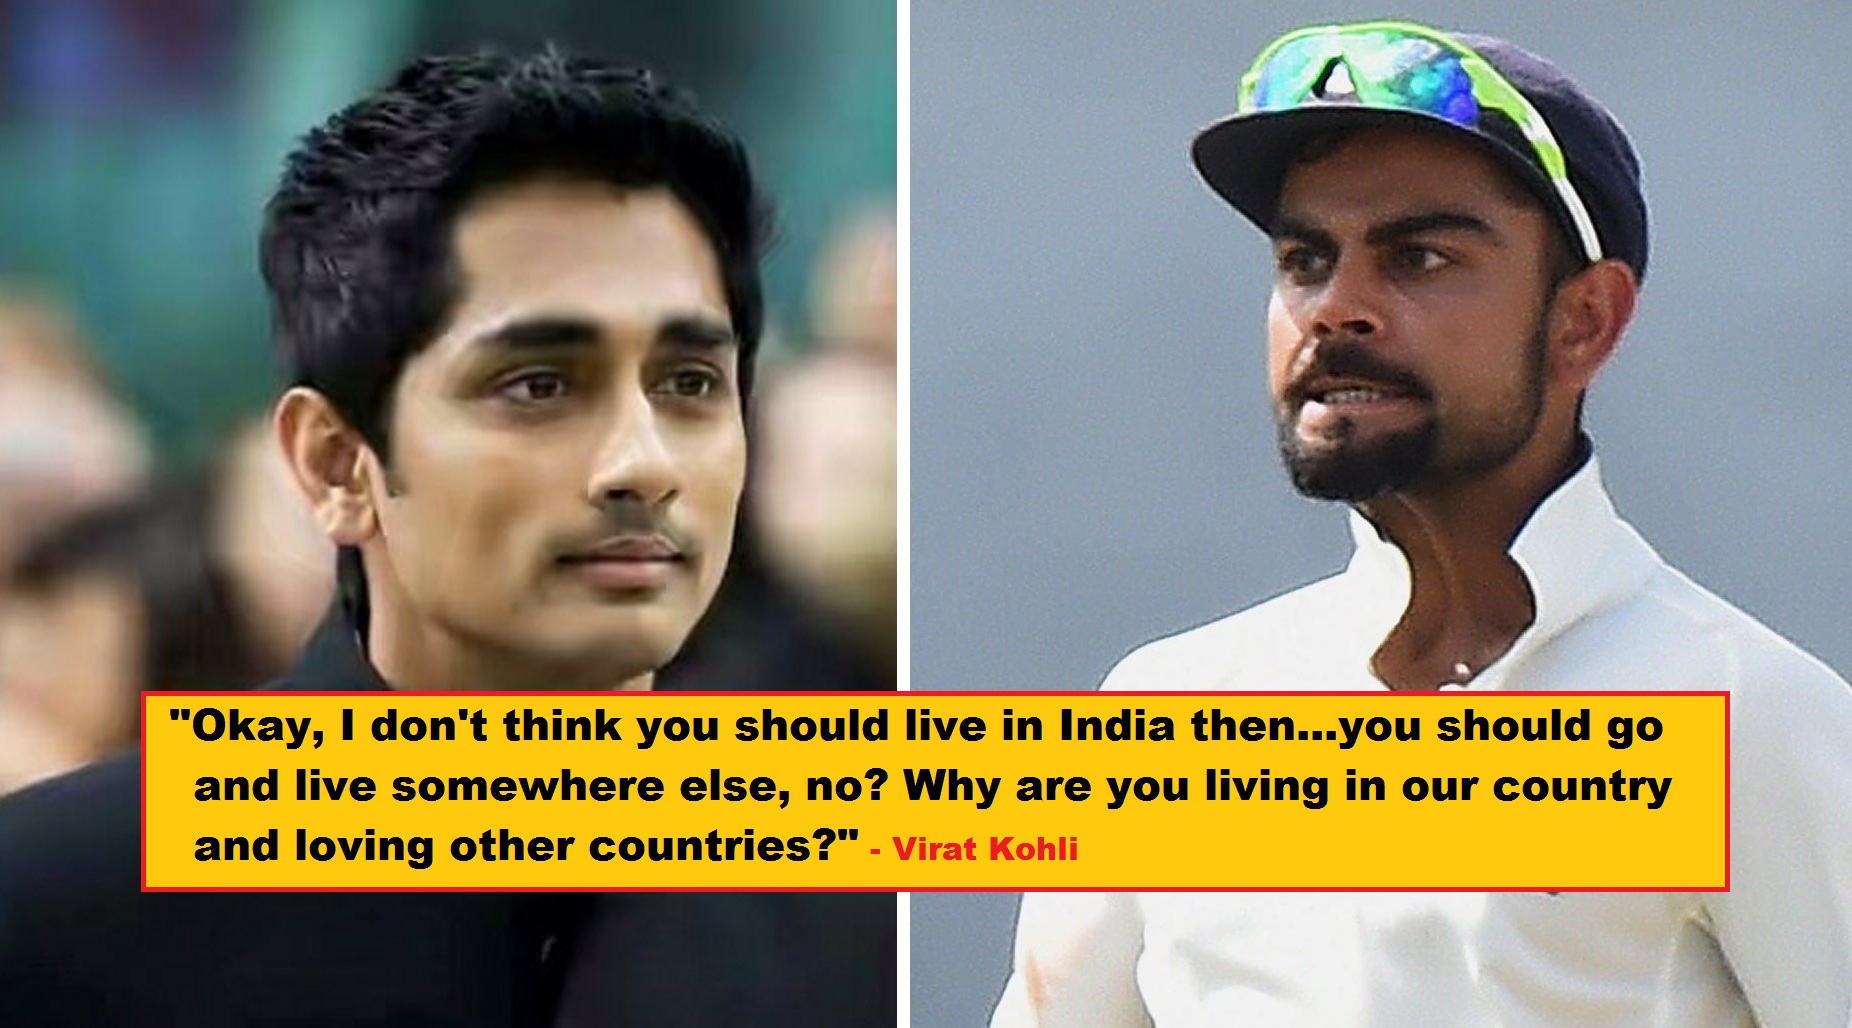 Kohli Asked Cricket Fan To “Leave India”, Got Slammed By Siddharth For His “Idiotic Words”